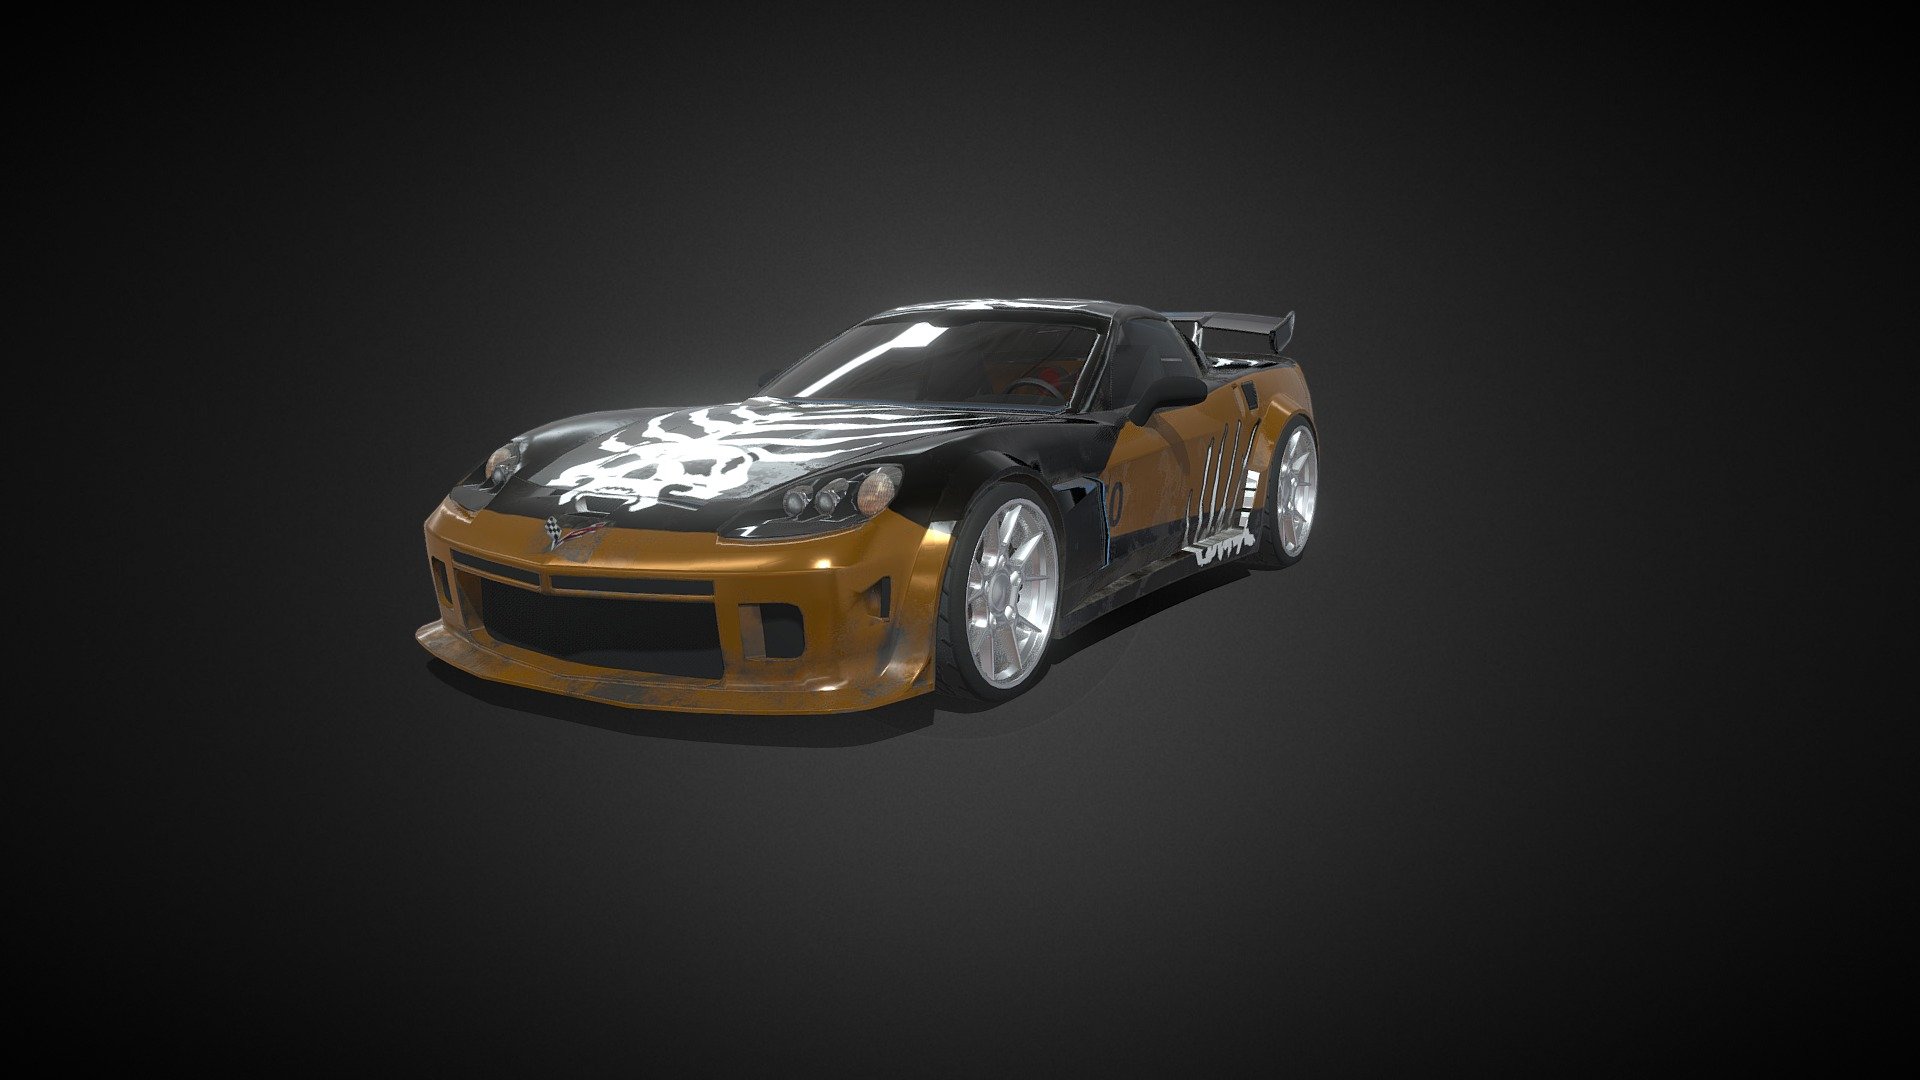 As a tribute and personal proyect I`m working on all NFS Most Wanted original blacklist cars. Hope you enjoy them!

You can see more about this project on https://www.artstation.com/m3dov 
Also you can follow my insta https://www.instagram.com/3dov_mxn/ - Webster Corvette NFSMW - Download Free 3D model by memoov (@movartD) 3d model